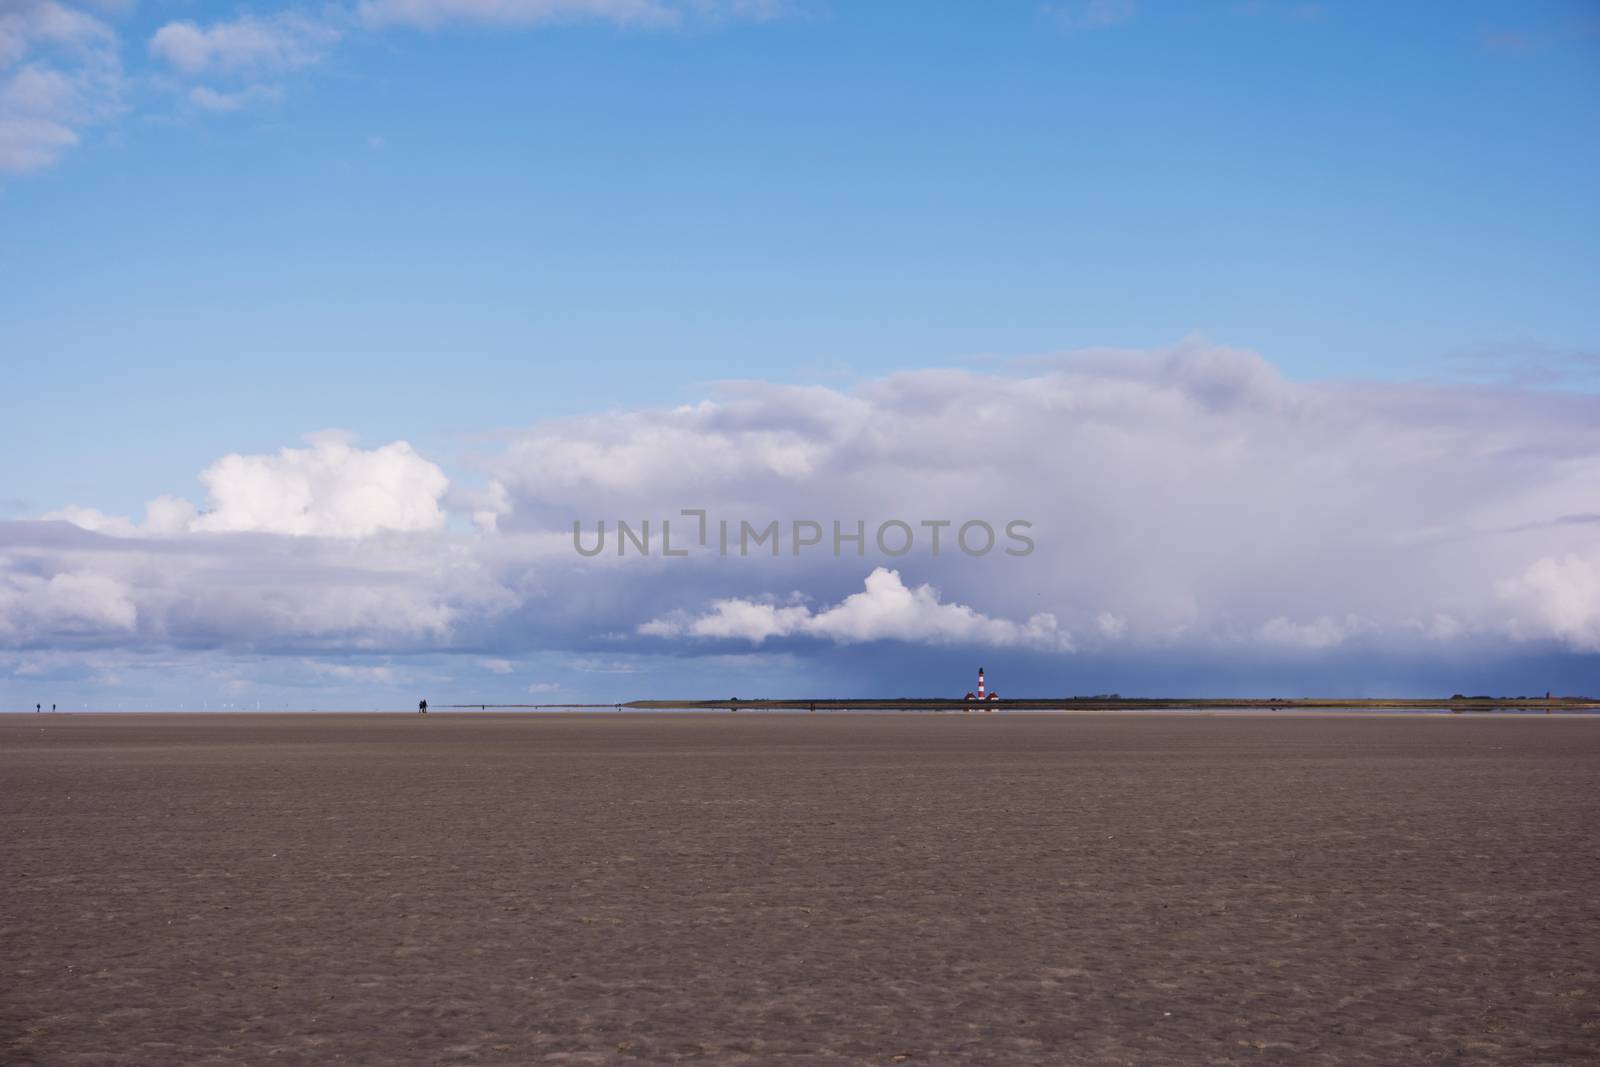 On the Beach of St. Peter-Ording in Germany